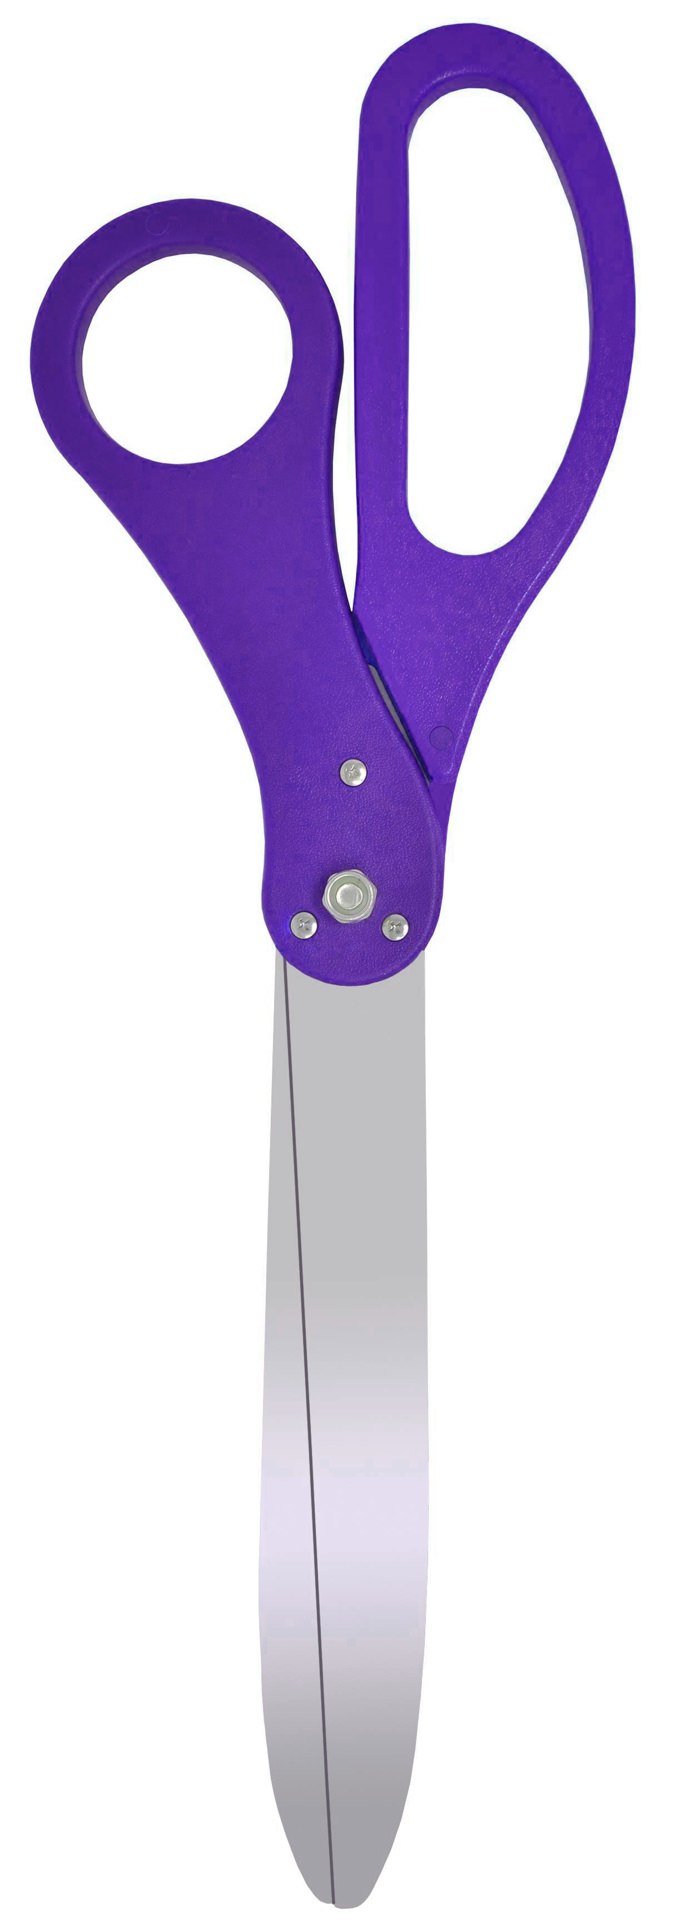 https://www.ceremonialsupplies.com/images/thumbs/0002494_purple-ribbon-cutting-scissors-with-silver-stainless-steel-blades.jpeg